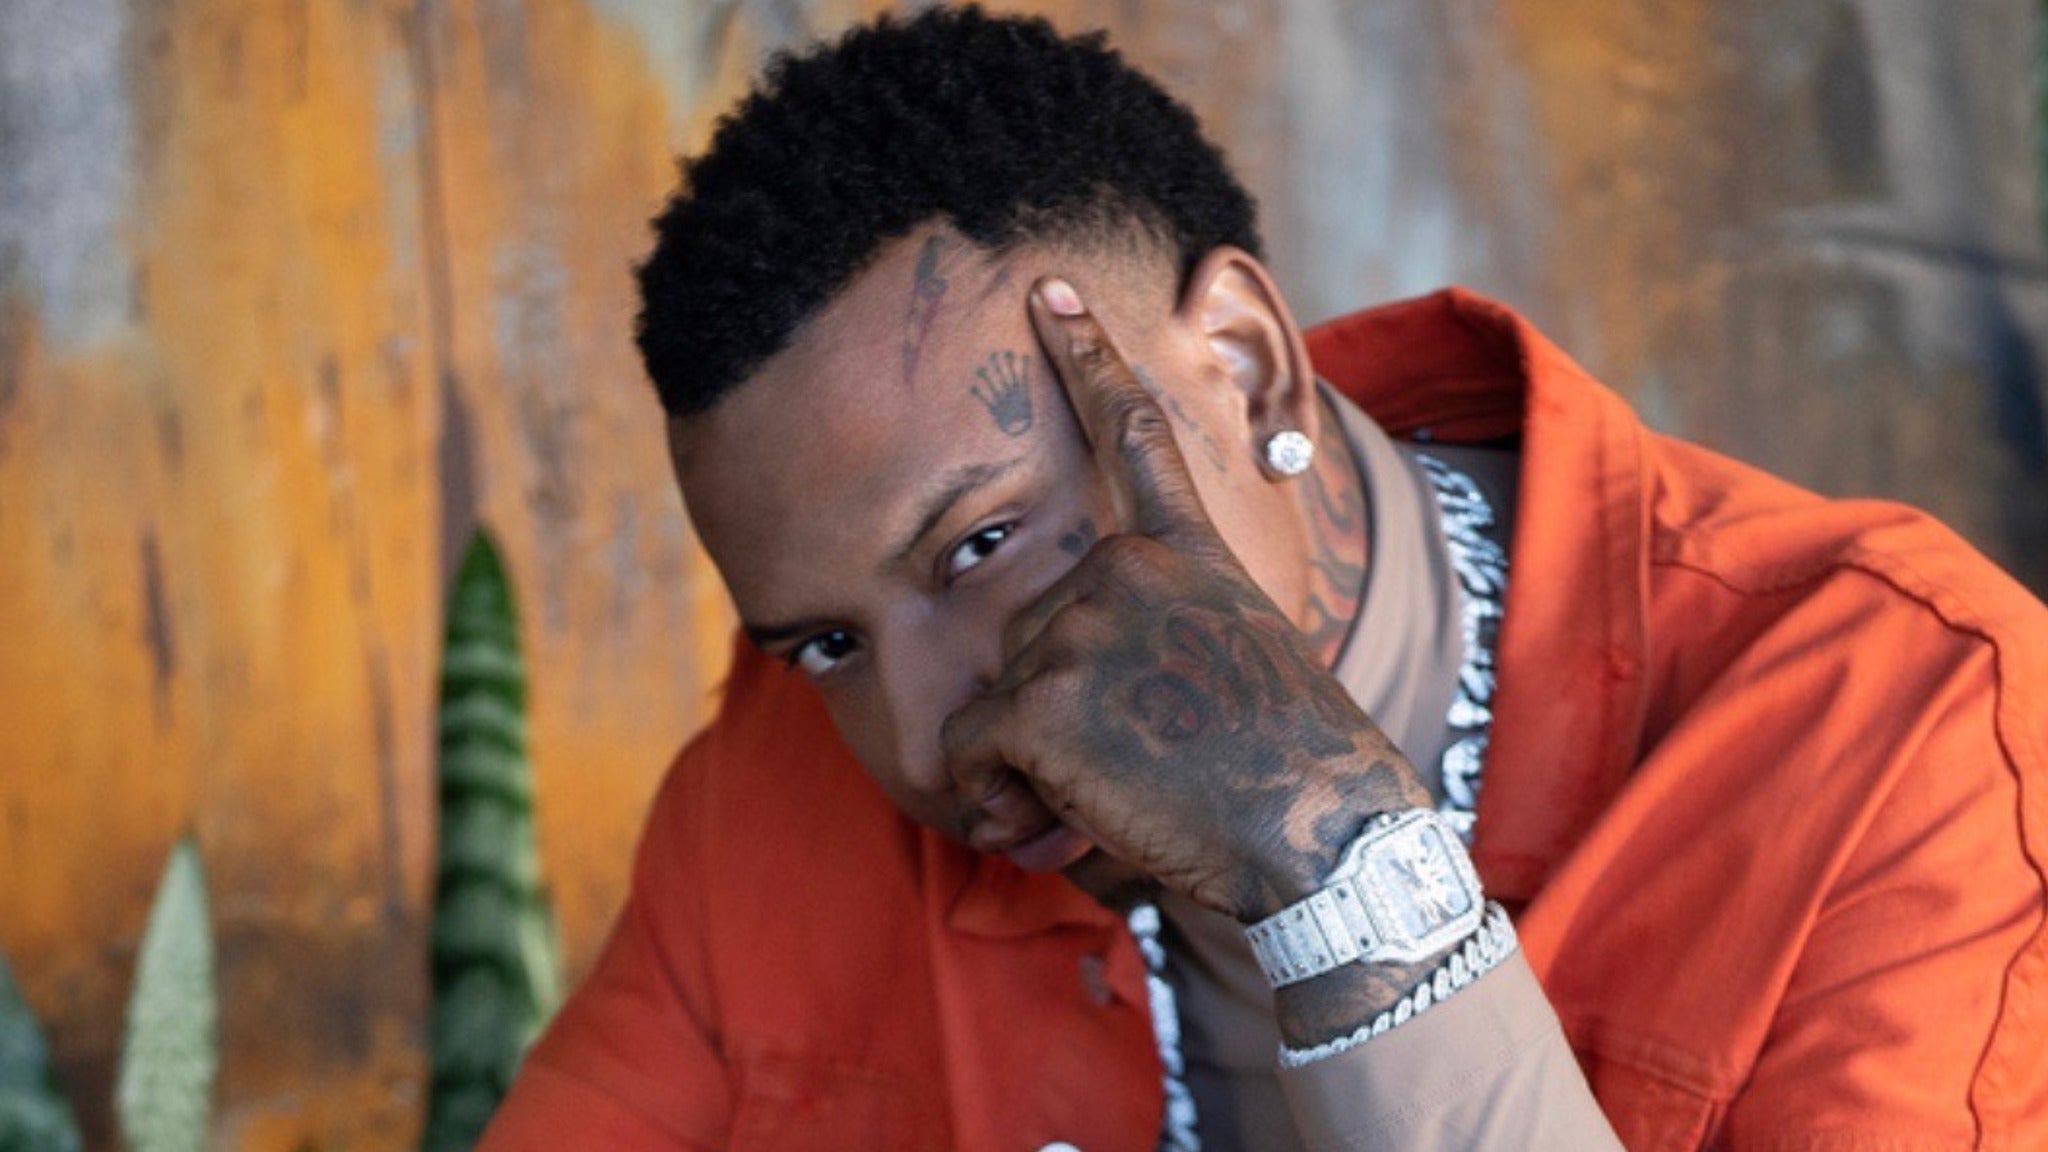 Moneybagg Yo - Larger Than Life Tour presale code for show tickets in Milwaukee, WI (Fiserv Forum)